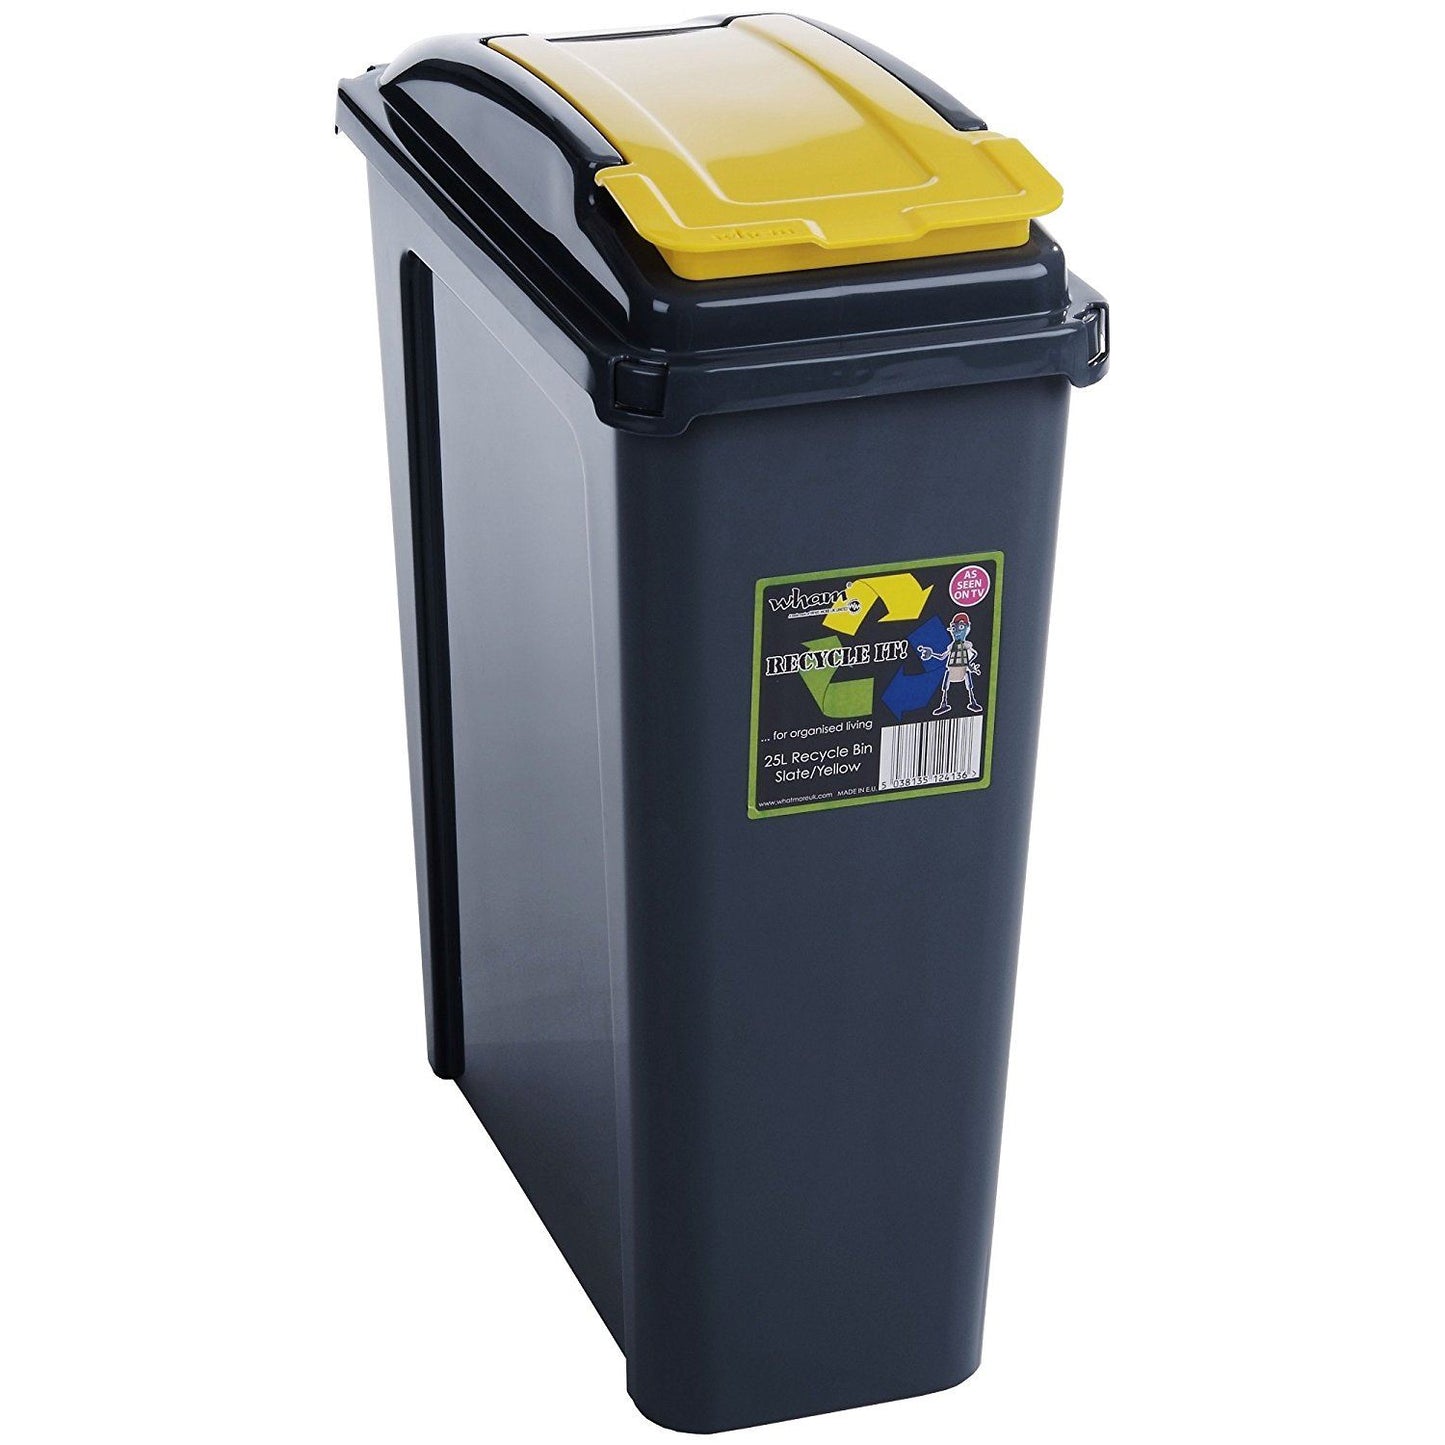 Keep Your Space Clean with a Pedal Bin